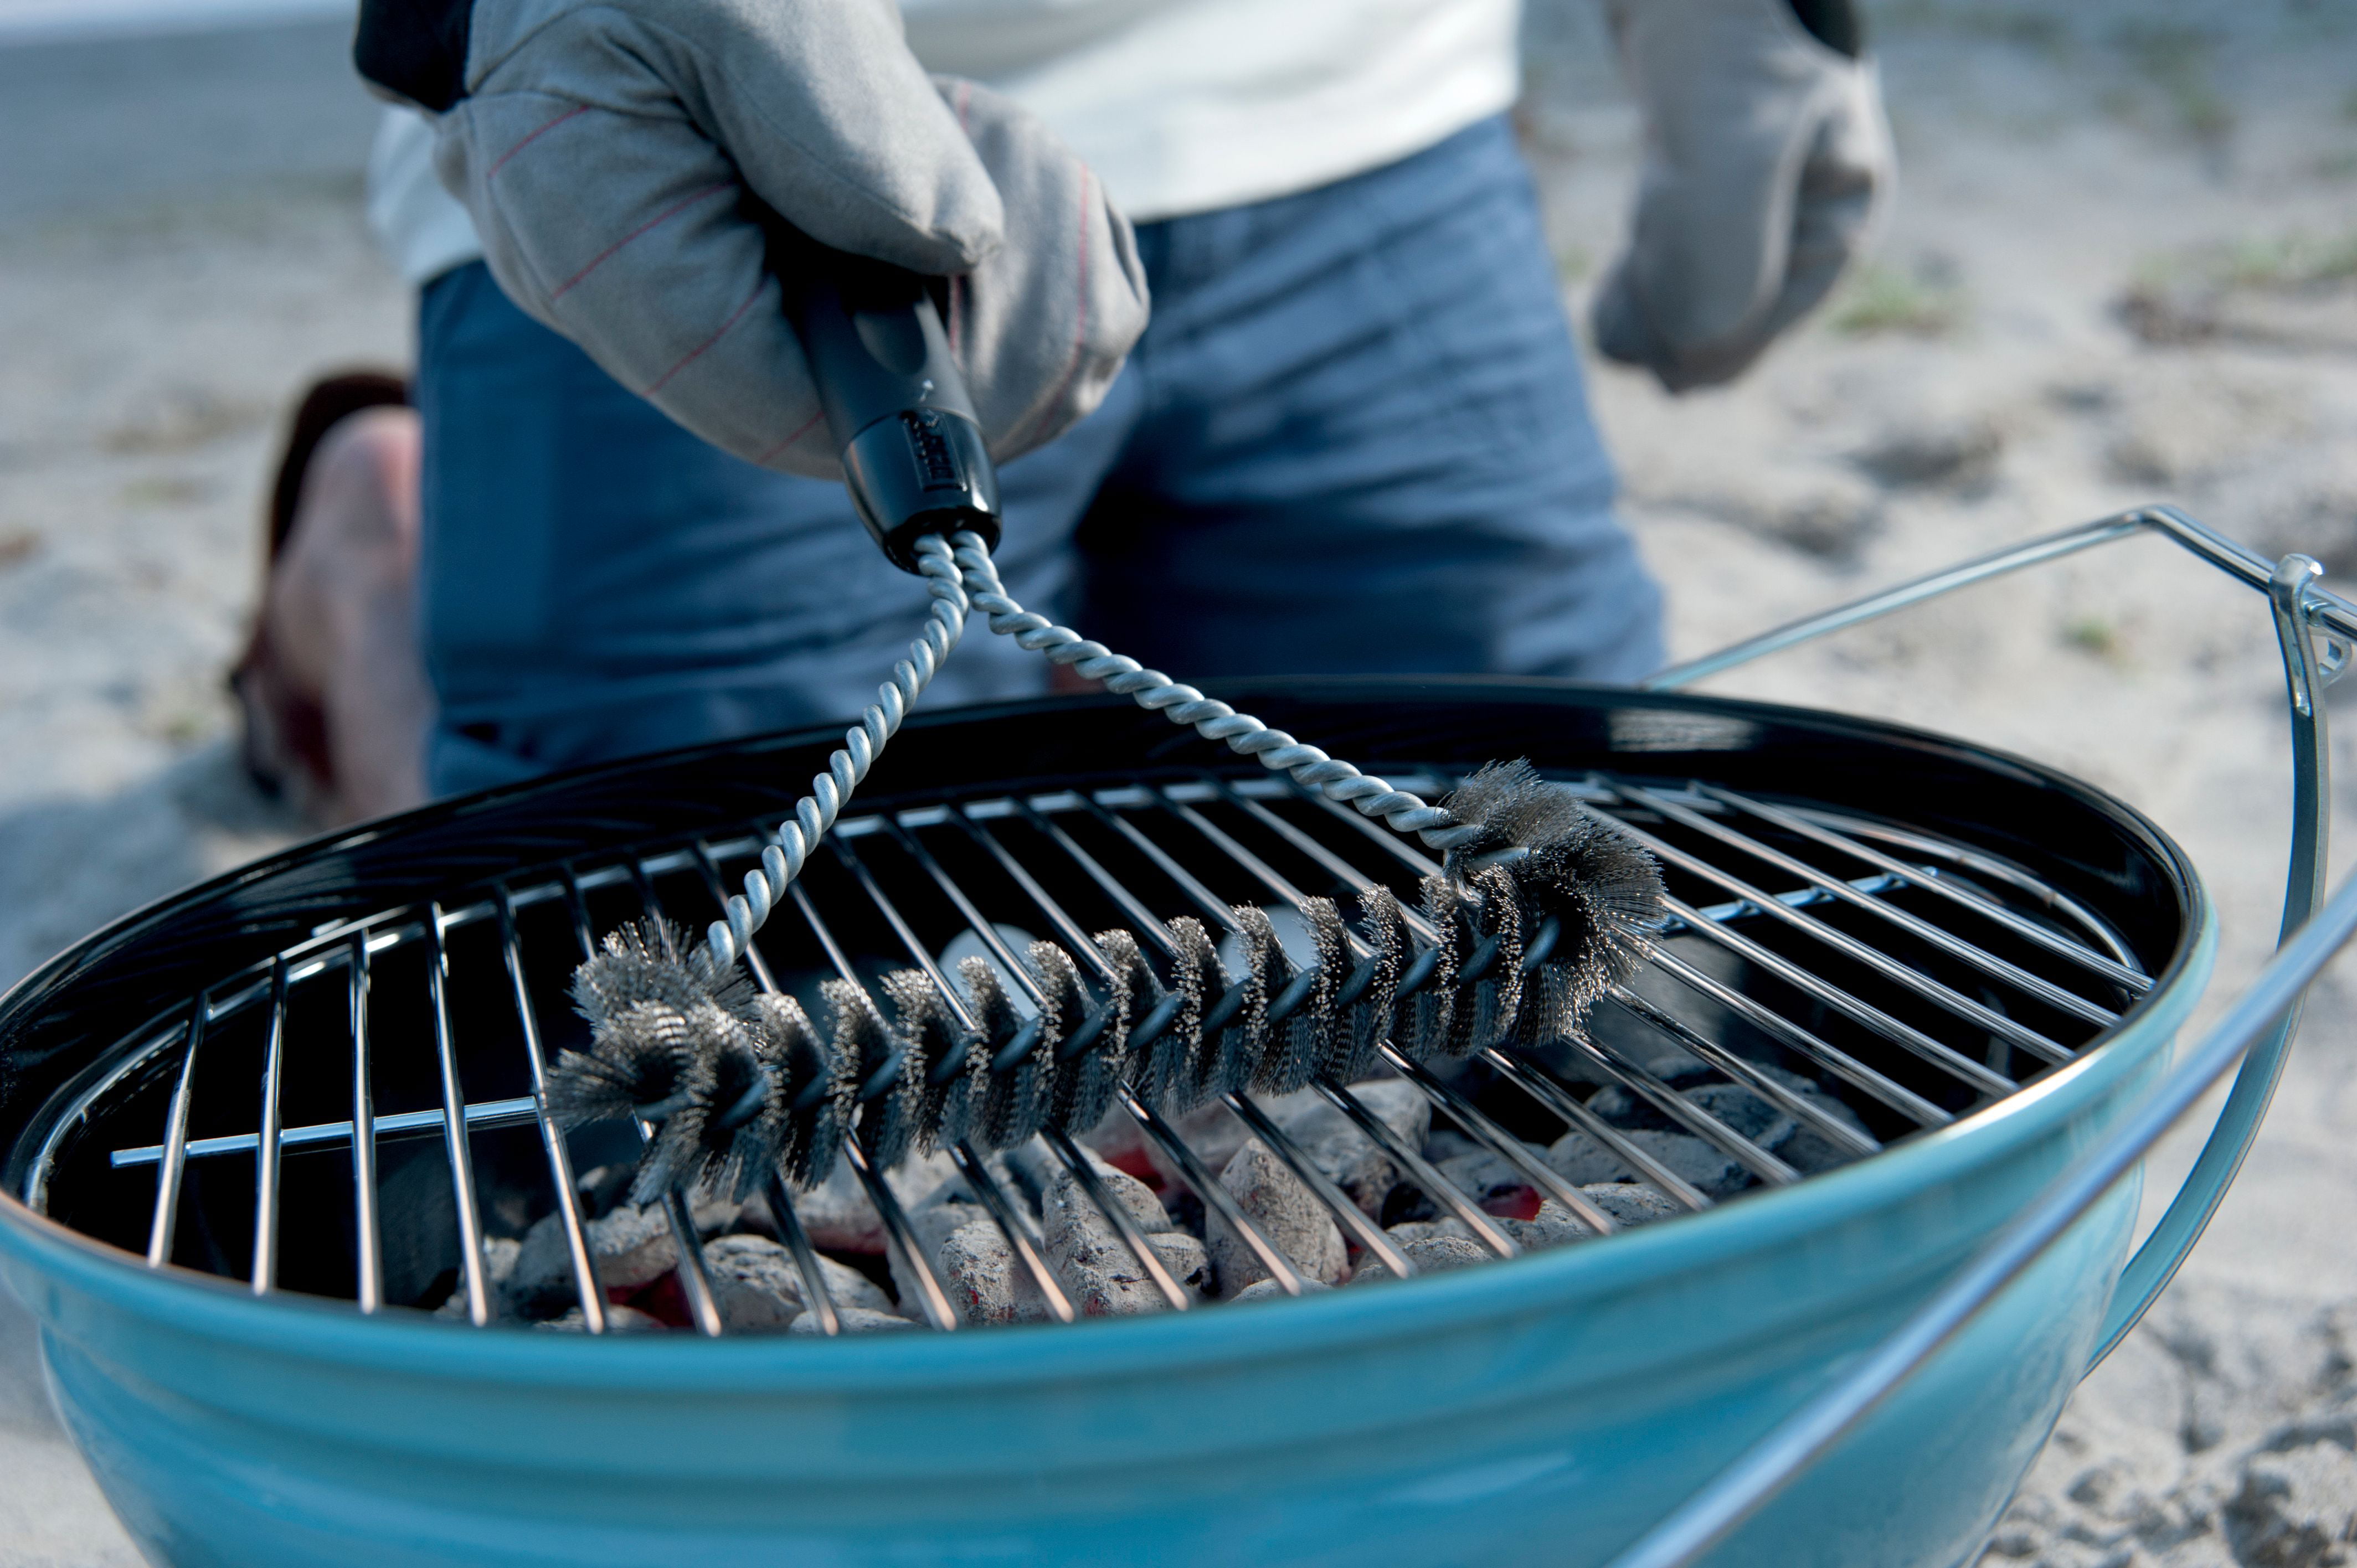 Saber Grills Foaming BBQ Grill Cleaner And Polish - Breaks Up